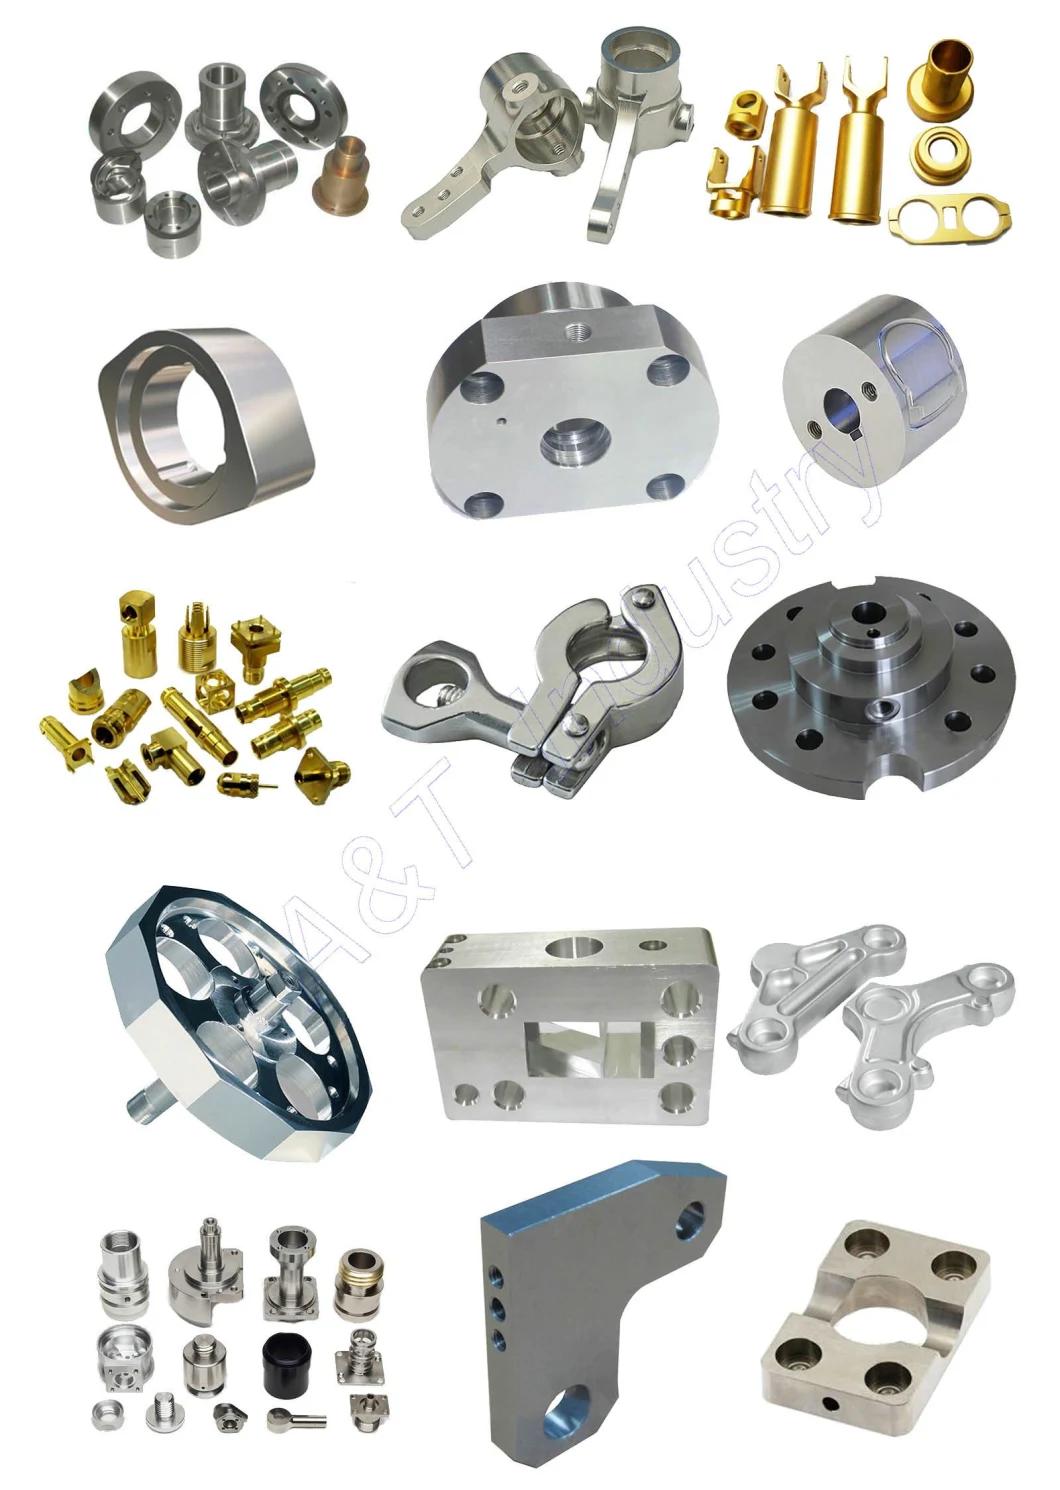 Hot Sale High Quality Stainless Steel Investment Casting